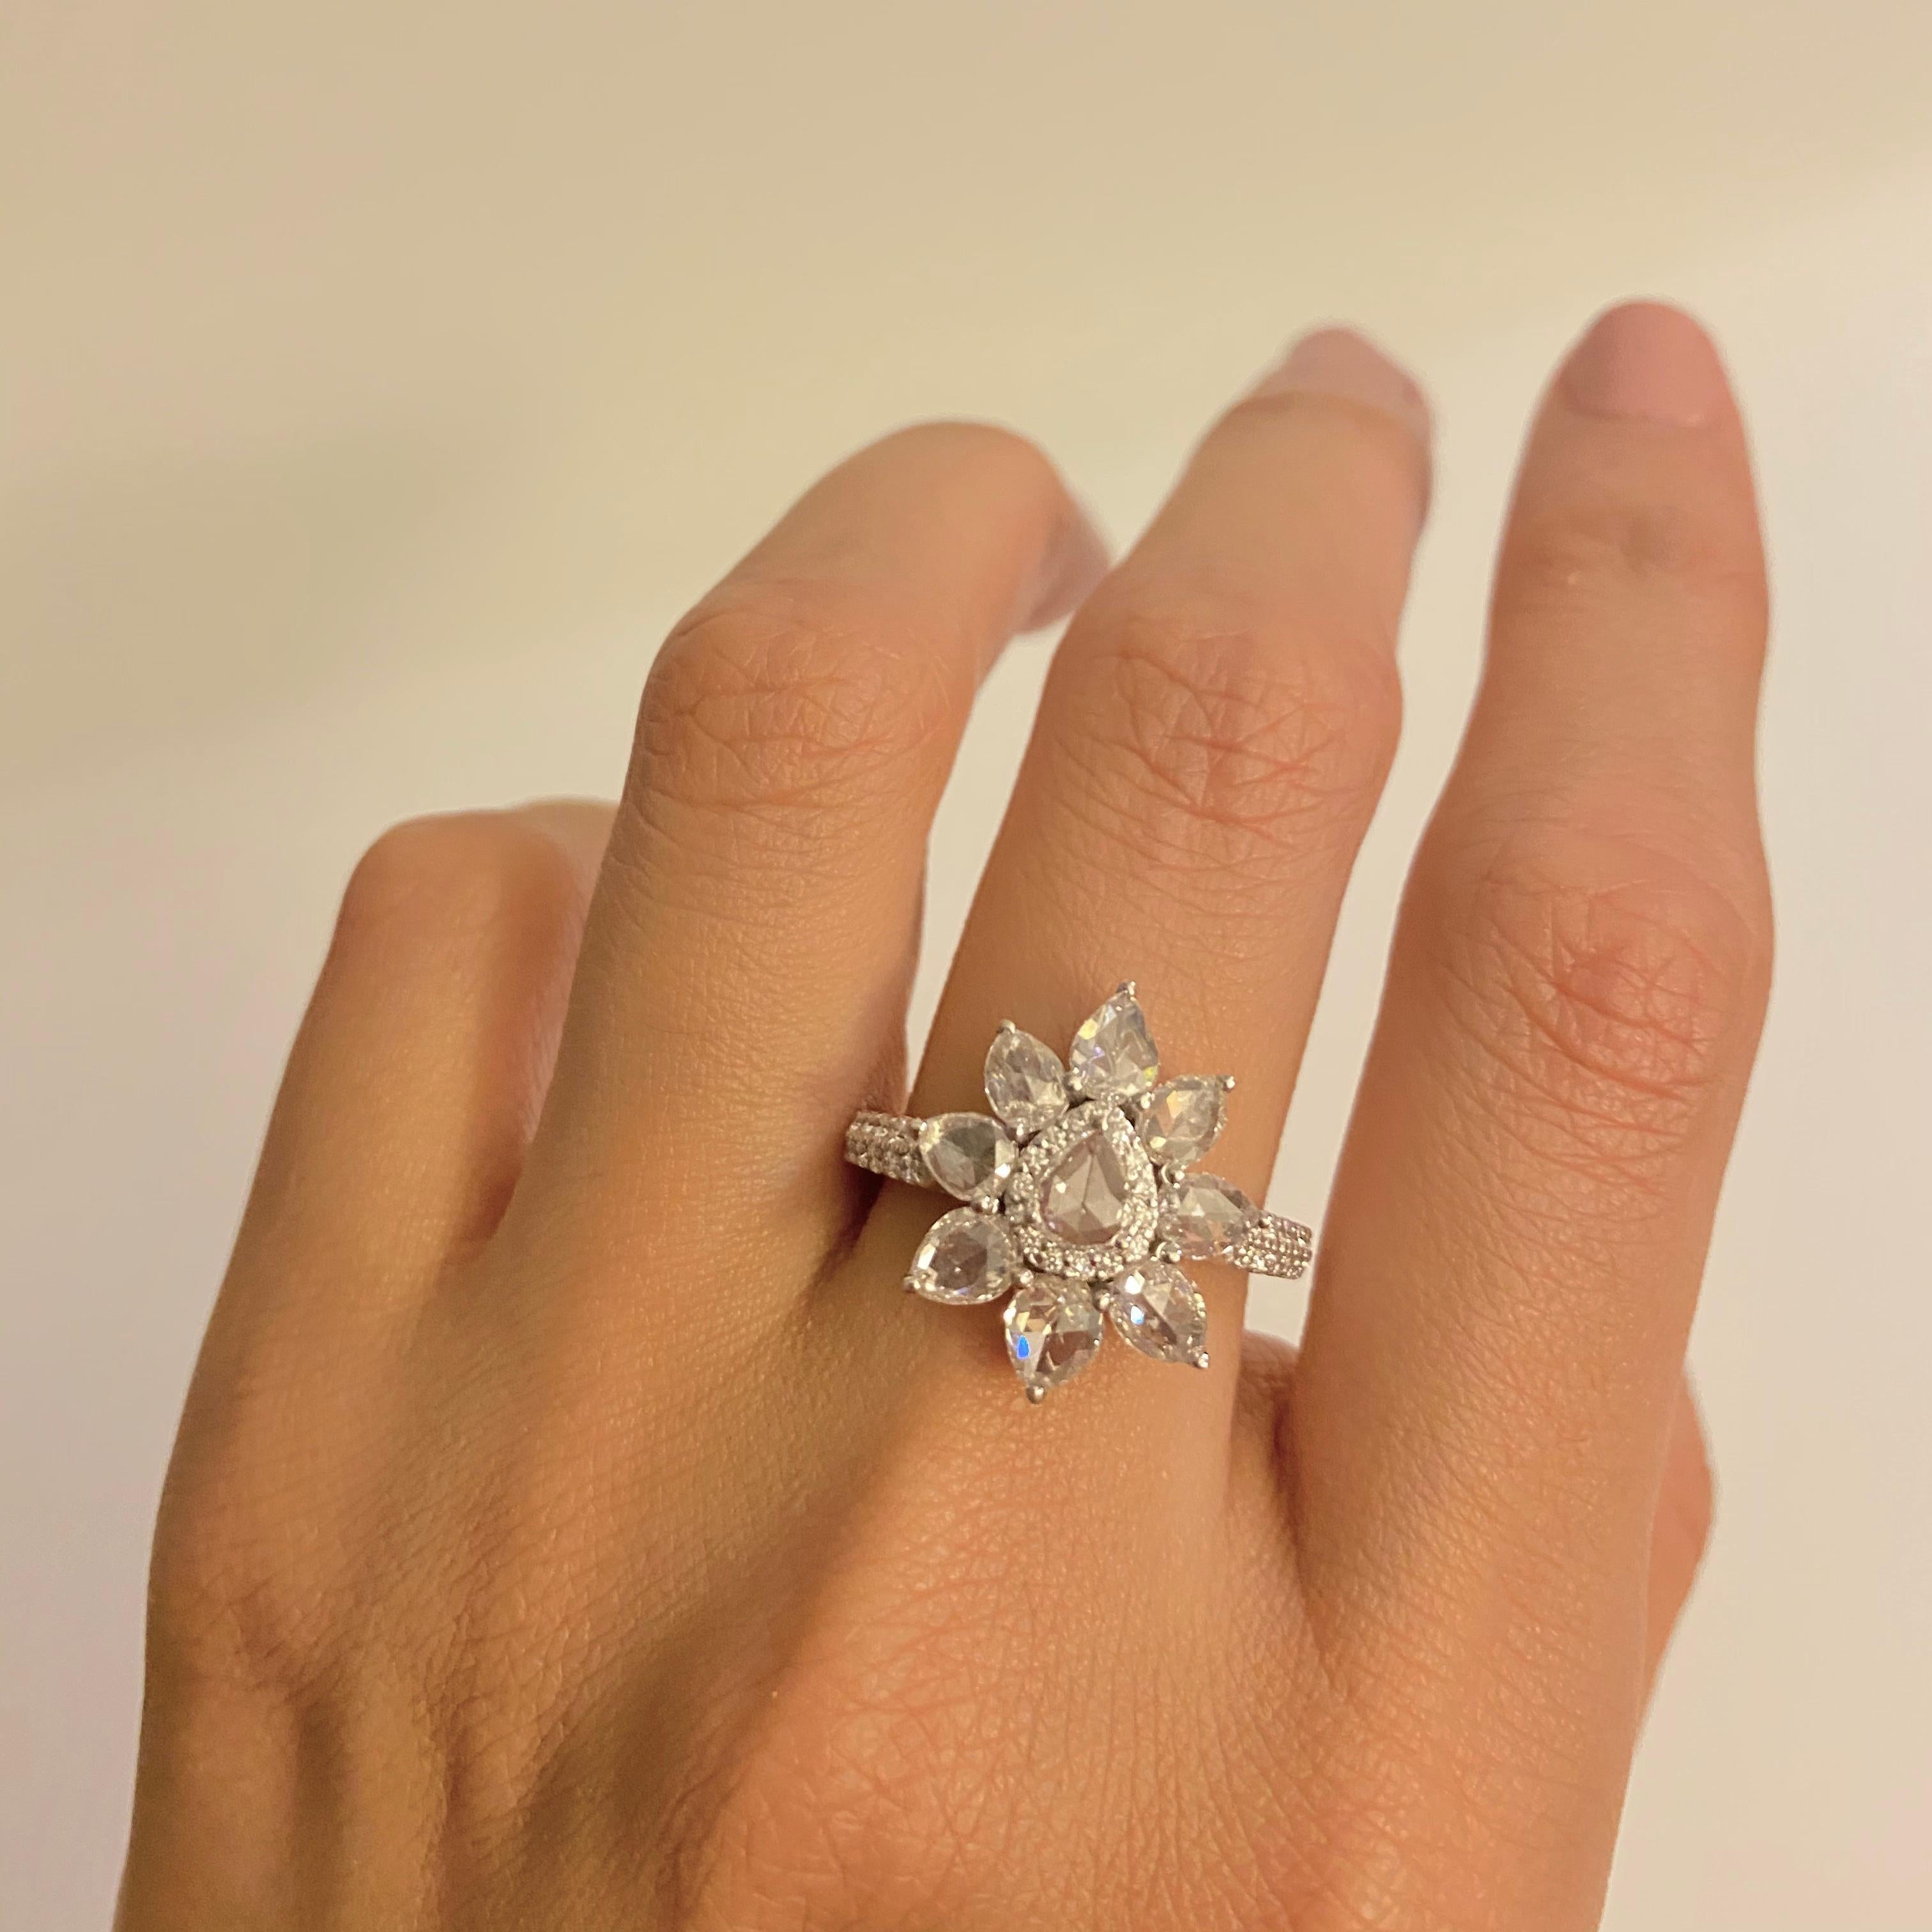 rose shaped ring with diamond center